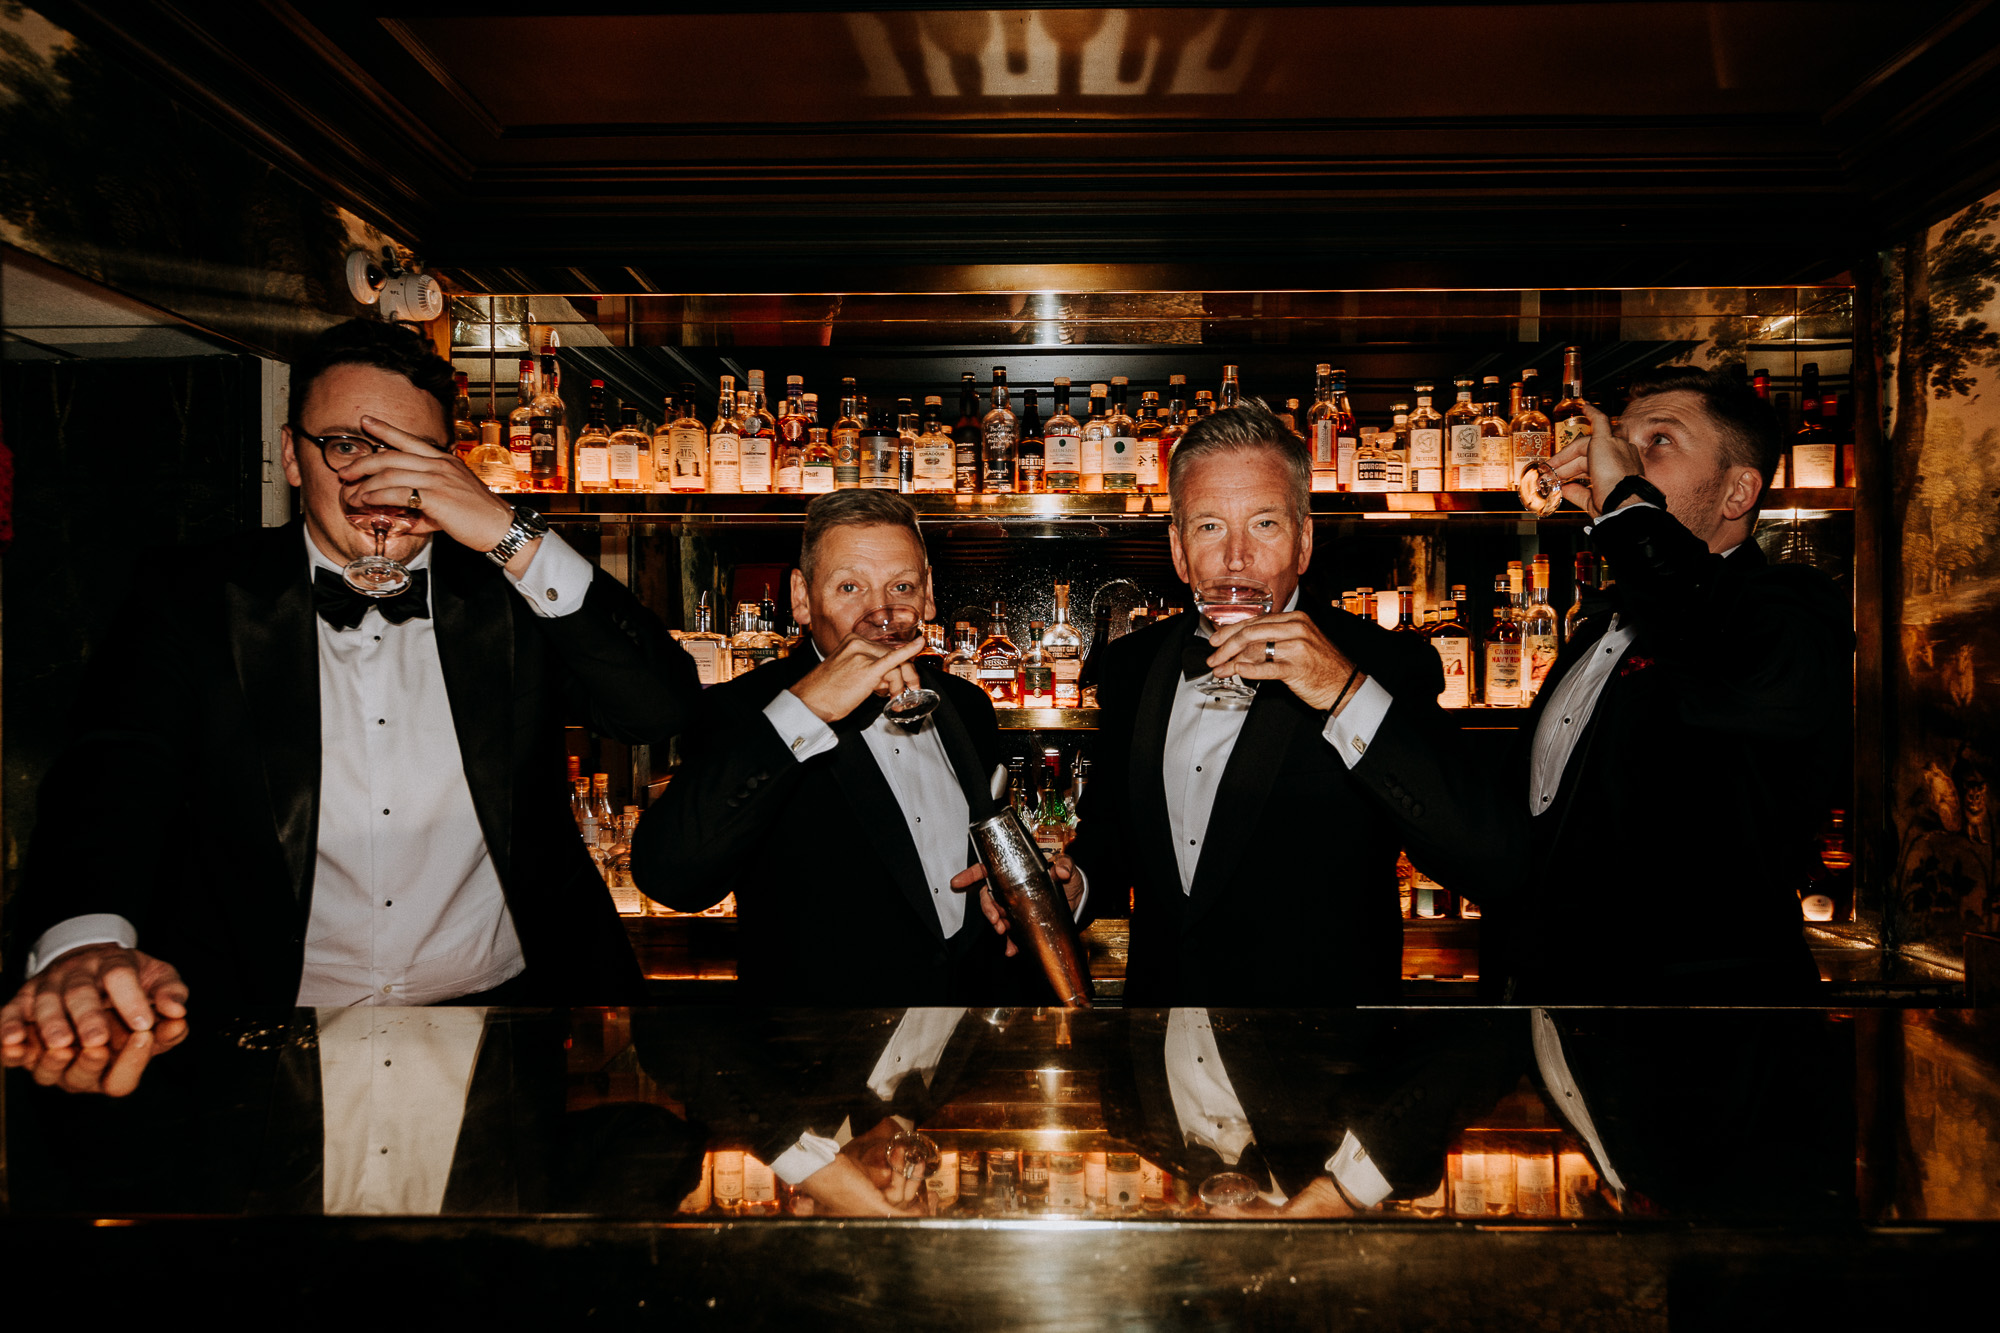 Paris wedding photographer: the two dads, the groom and his best man are posing in front of the Très Particulier bar in Montmartre before the ceremony